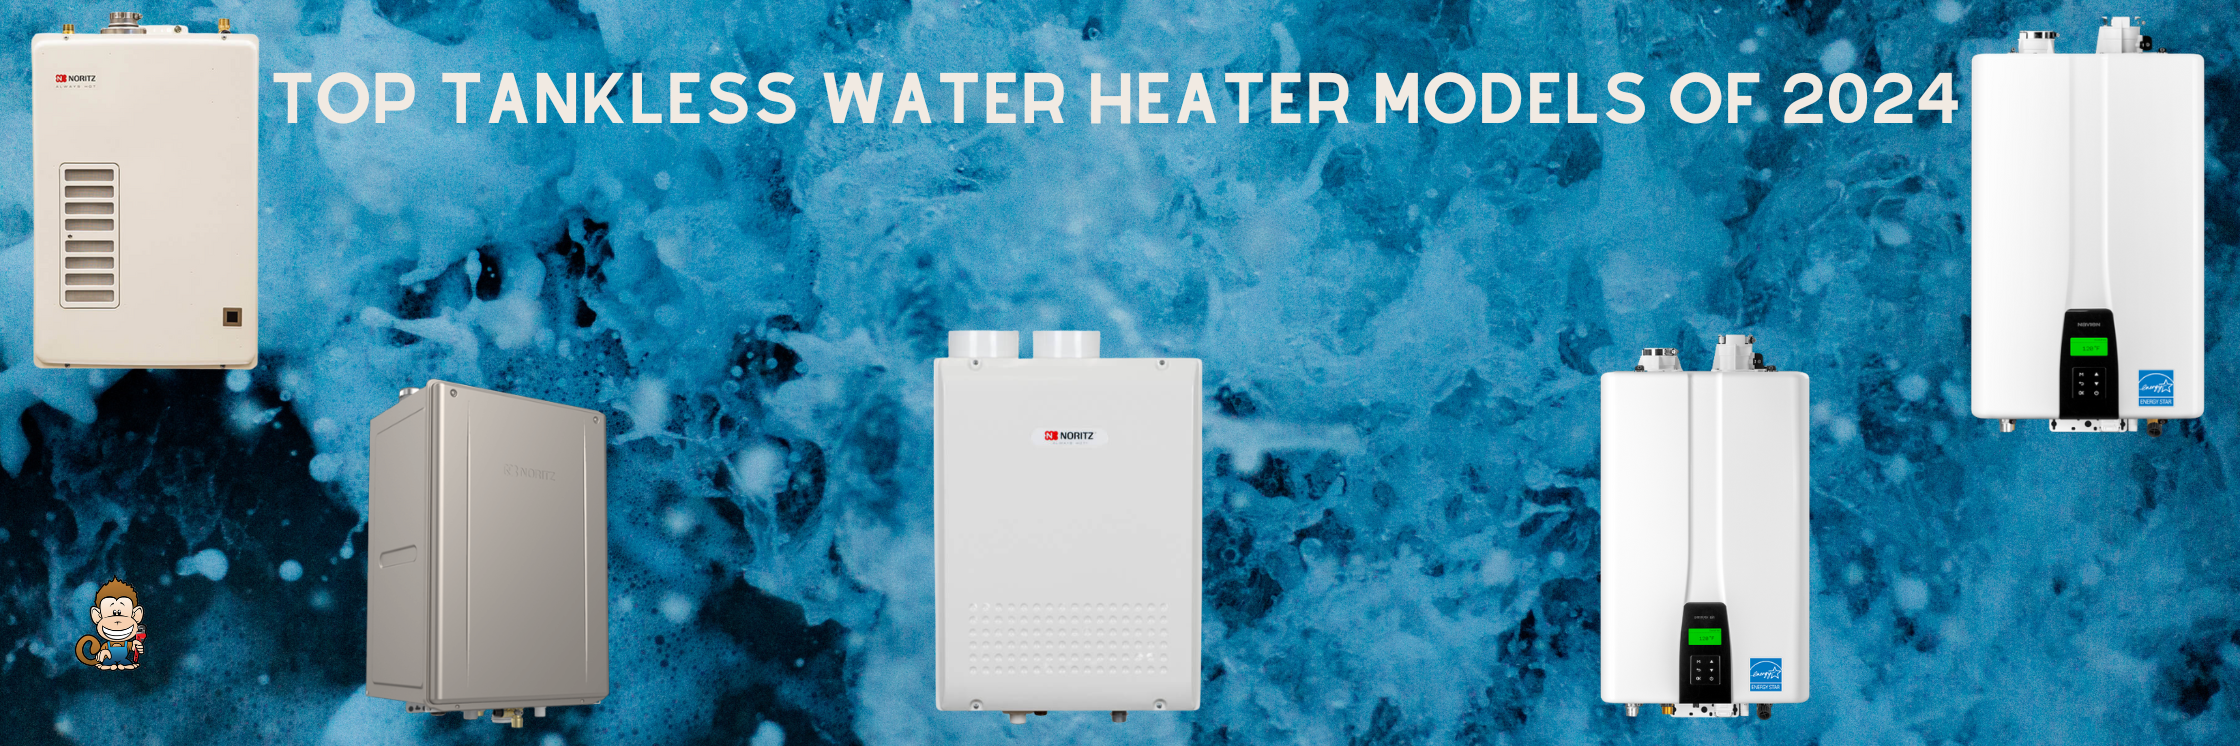 Top Tankless Water Heater Models of 2024